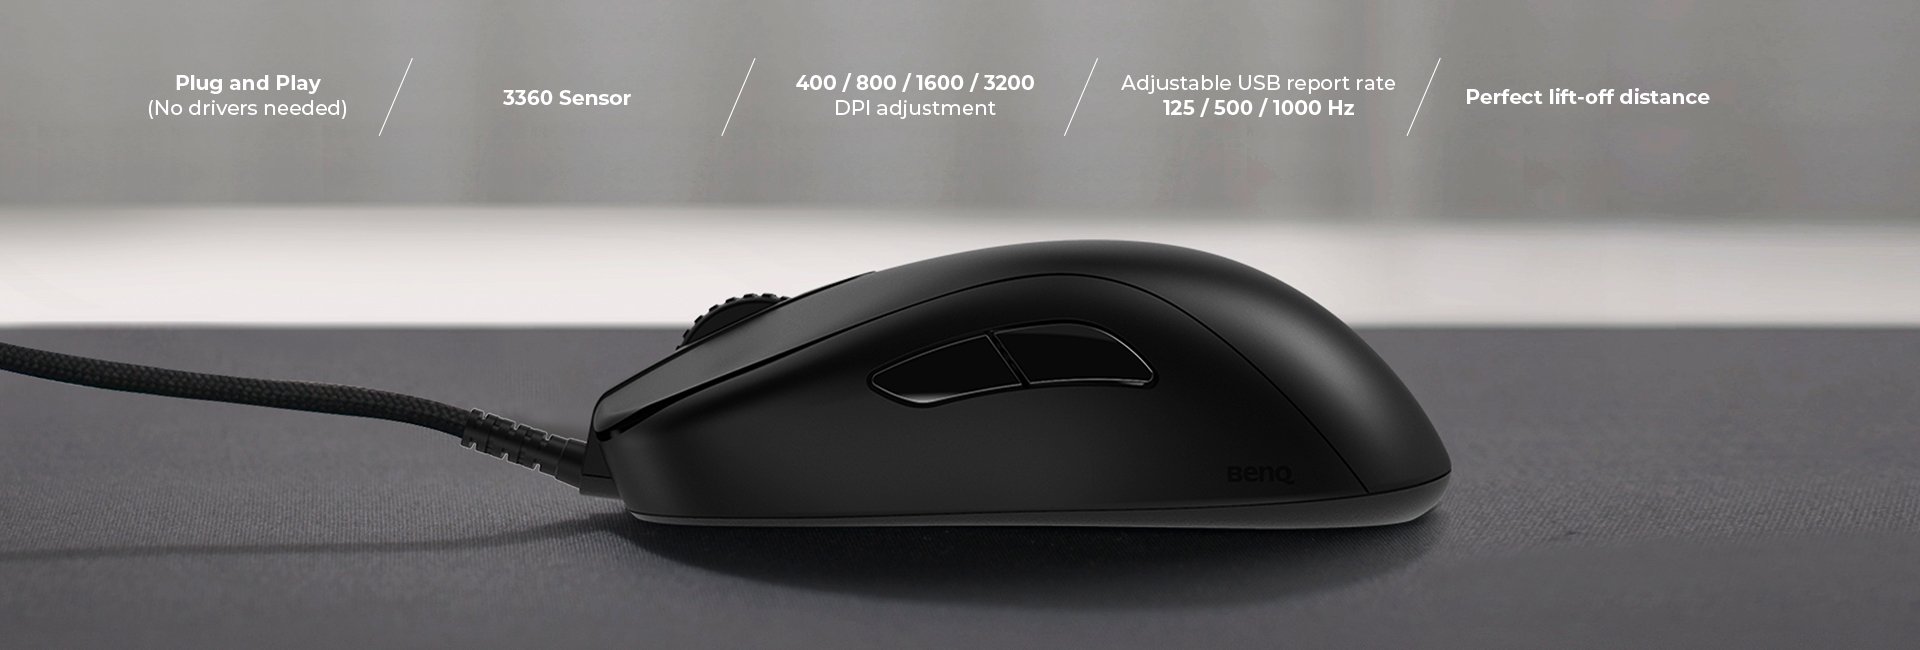 zowie-esports-gaming-mouse-s2-c-plug-and-play-3360-sensor-dpi-adjustment-adjustable-usb-report-rate-perfect-lift-off-distance